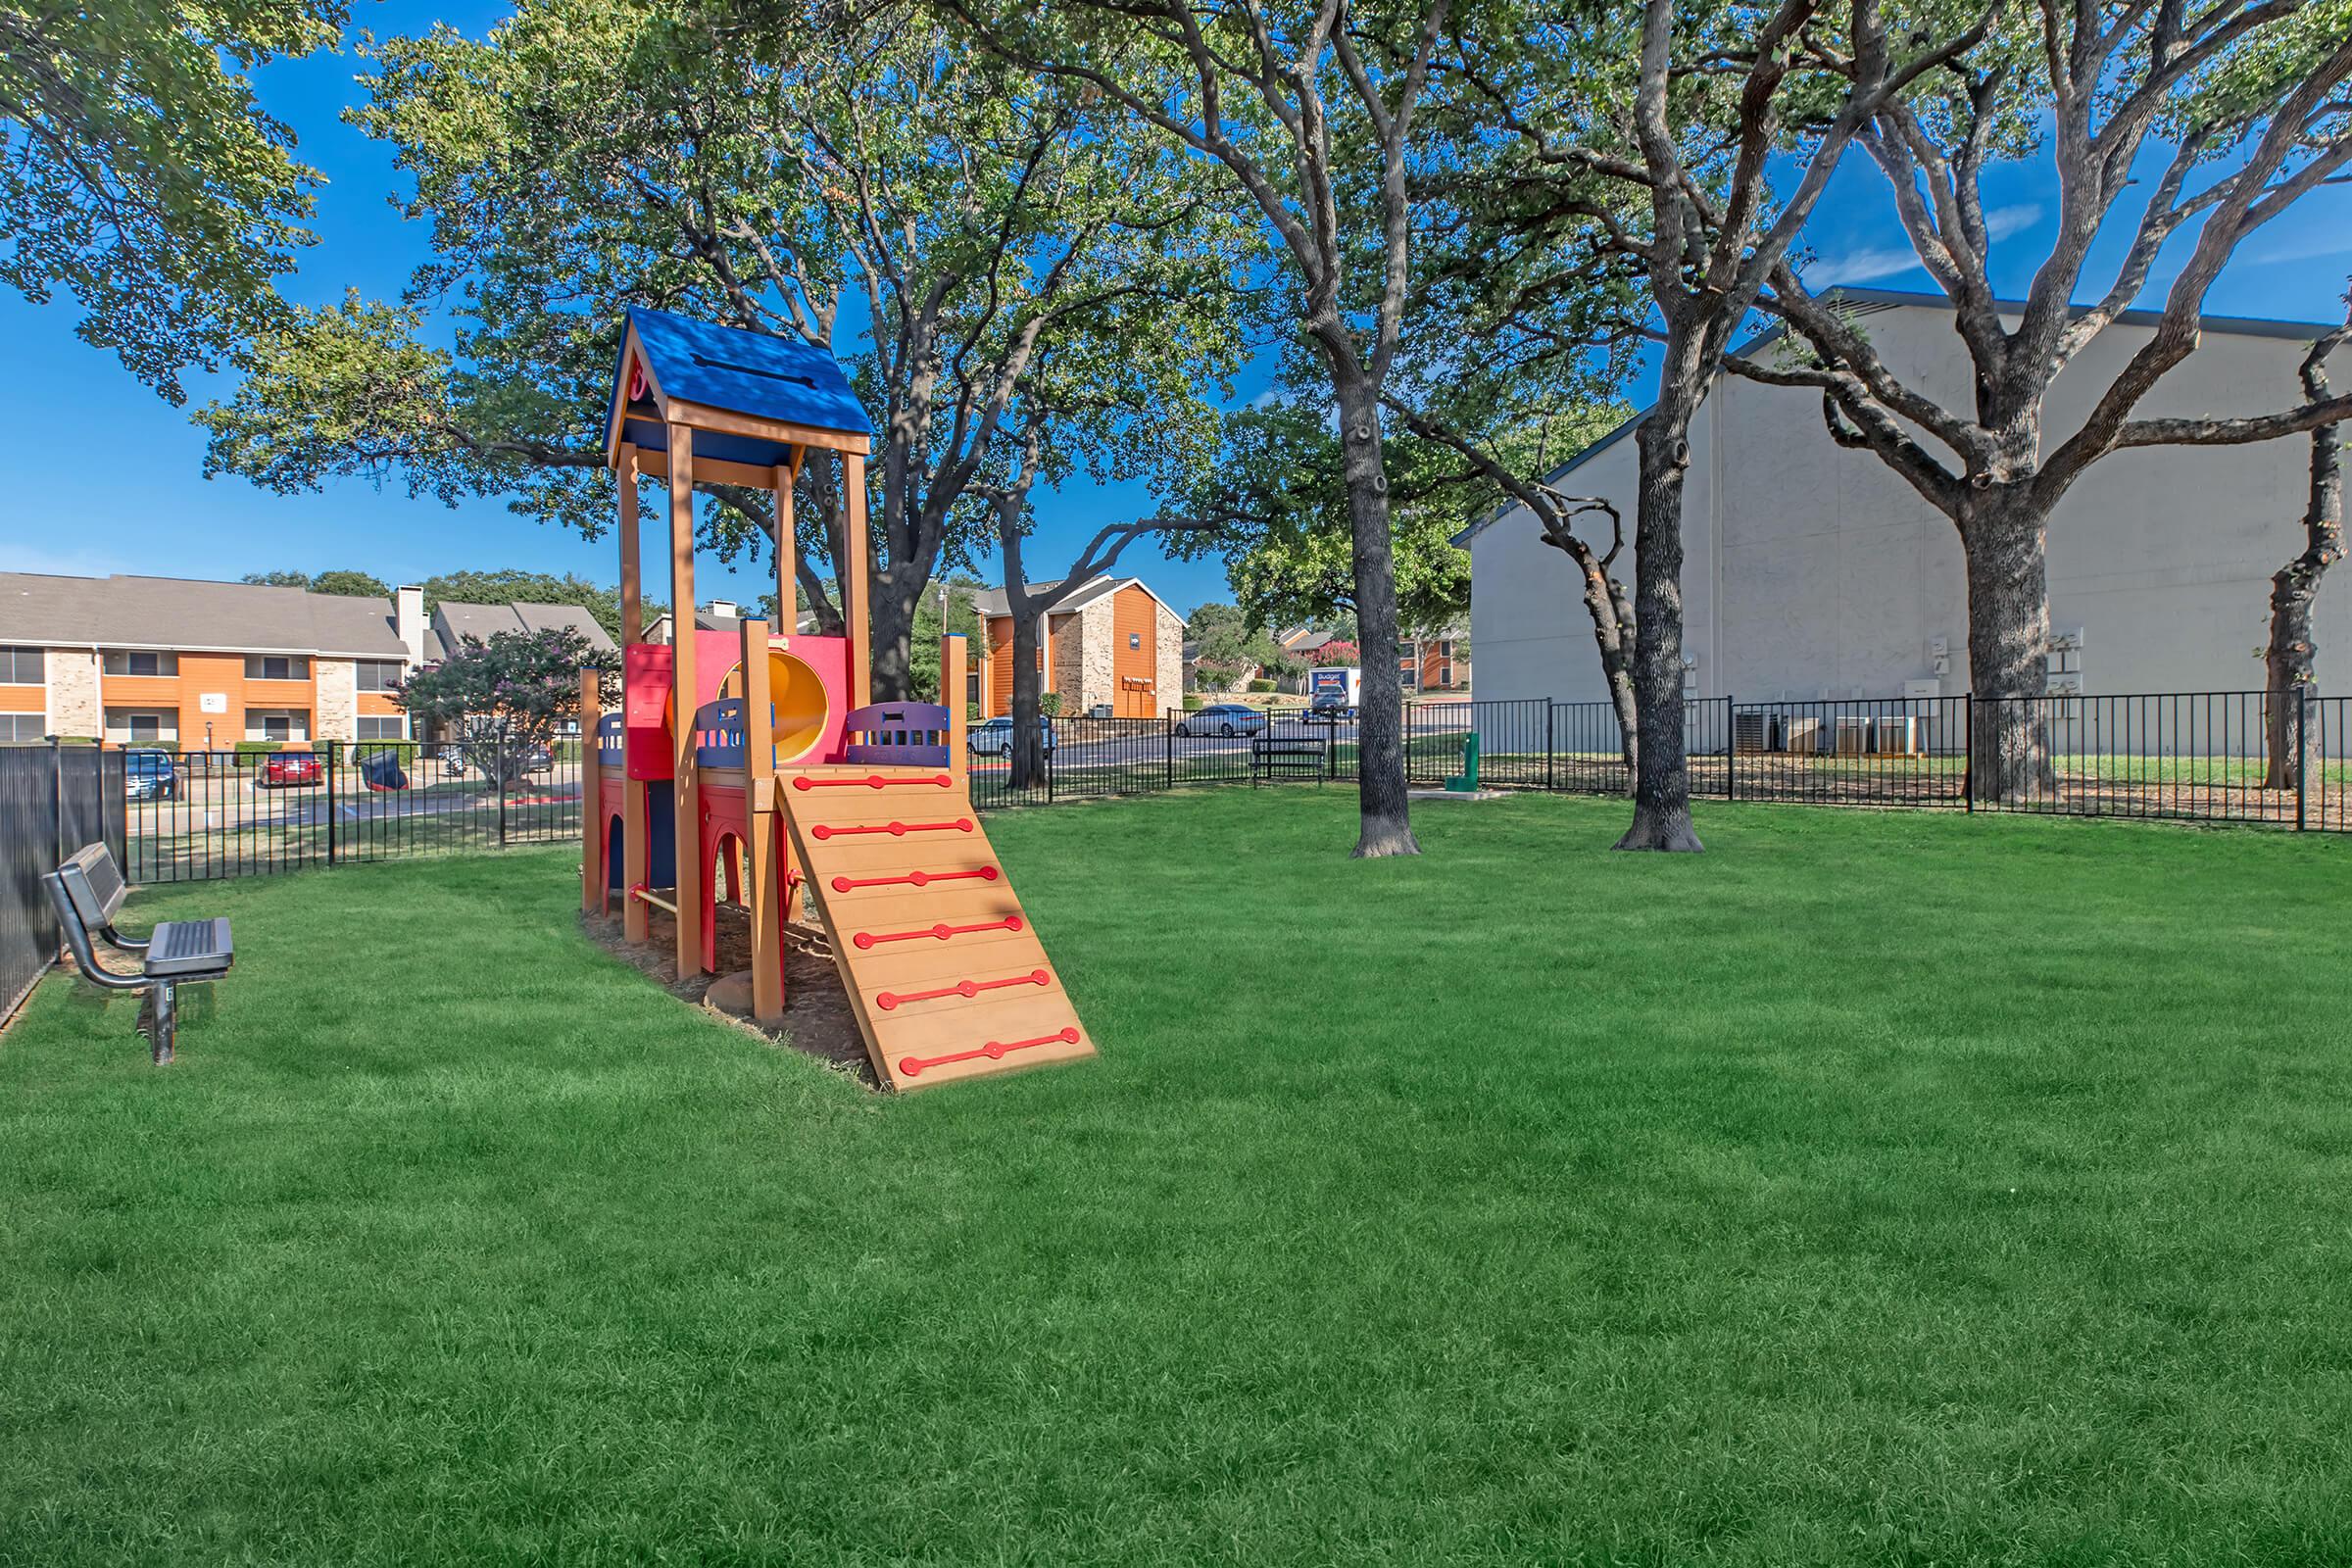 Outdoor grass-covered playground with trees and children's slide